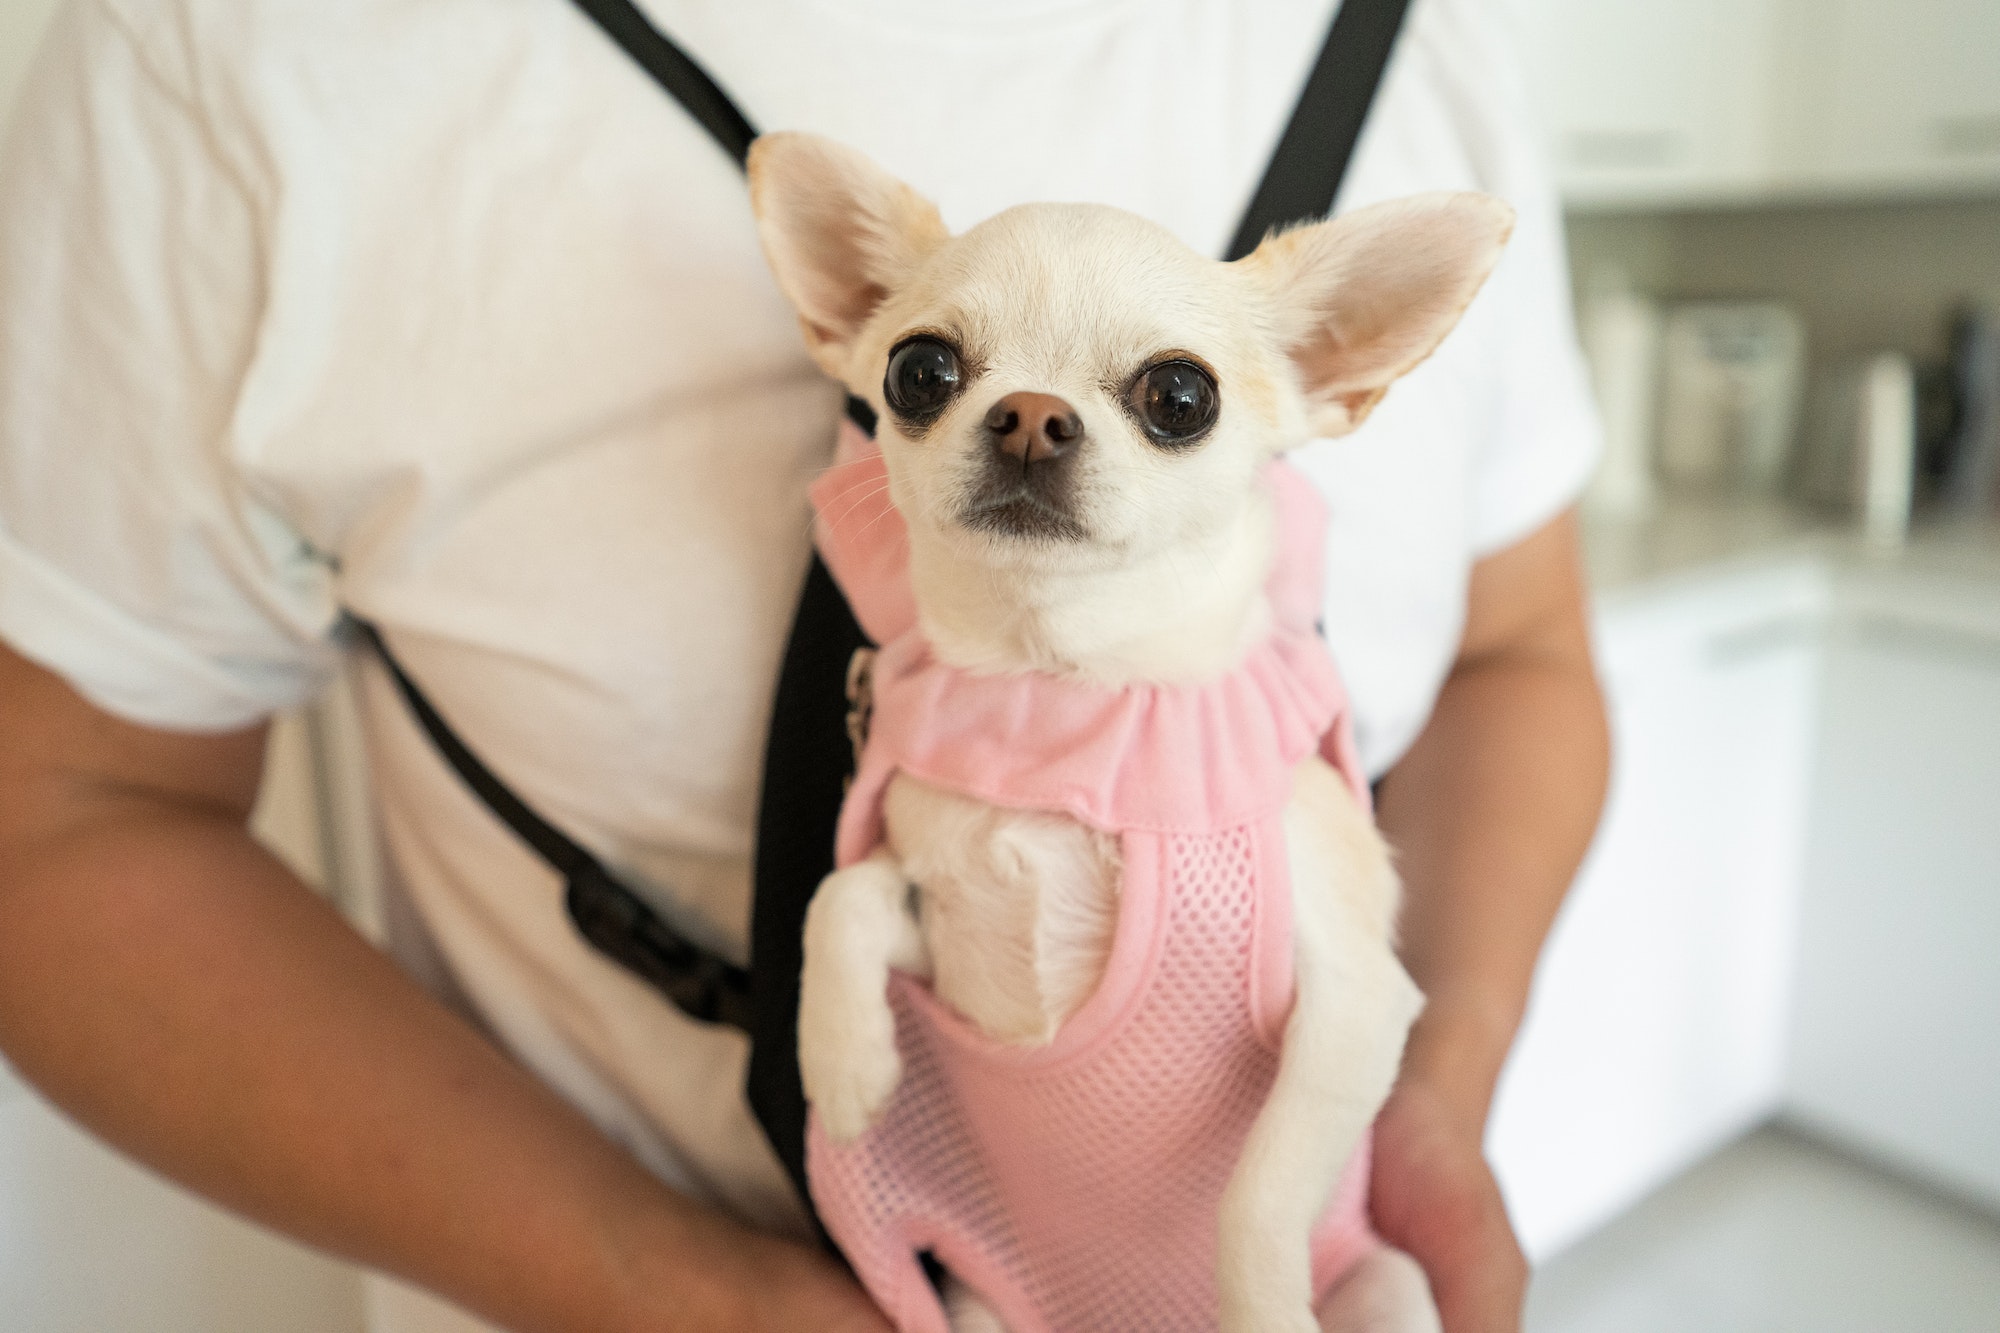 Small little chihuahua dog in a carrier harness